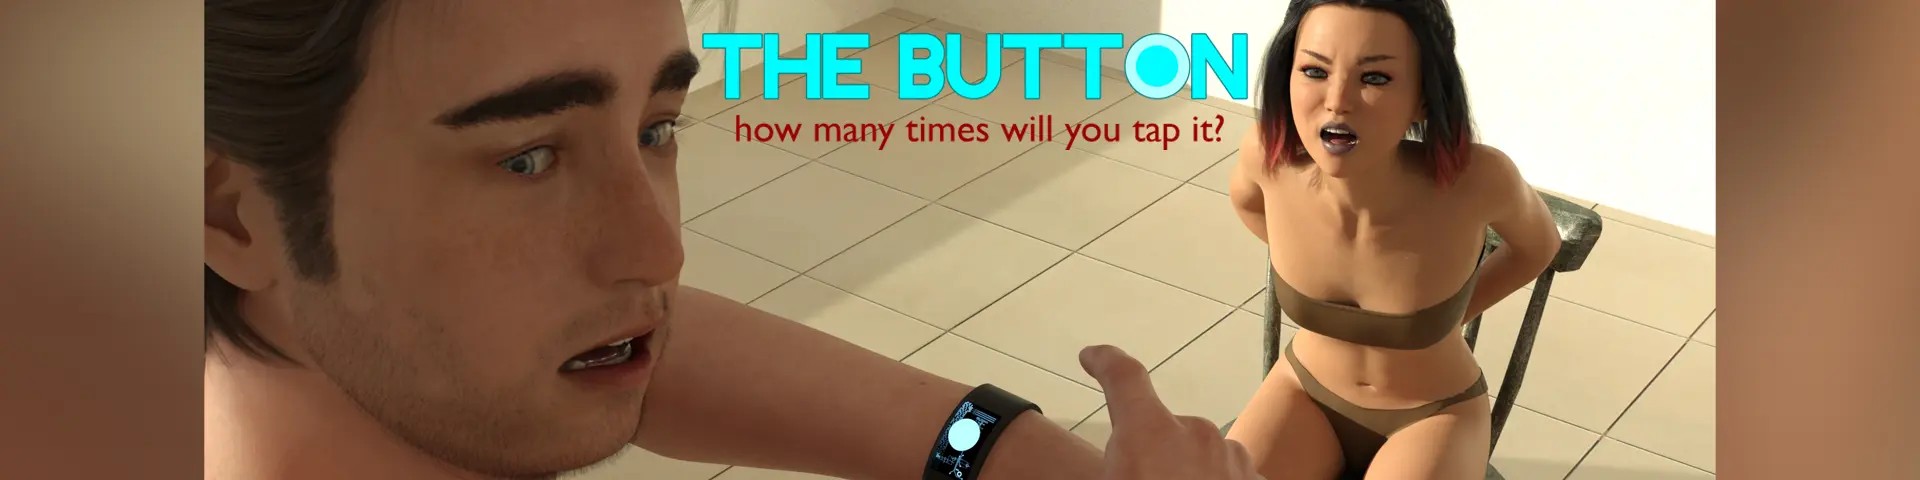 The Button [v0.0.2] main image